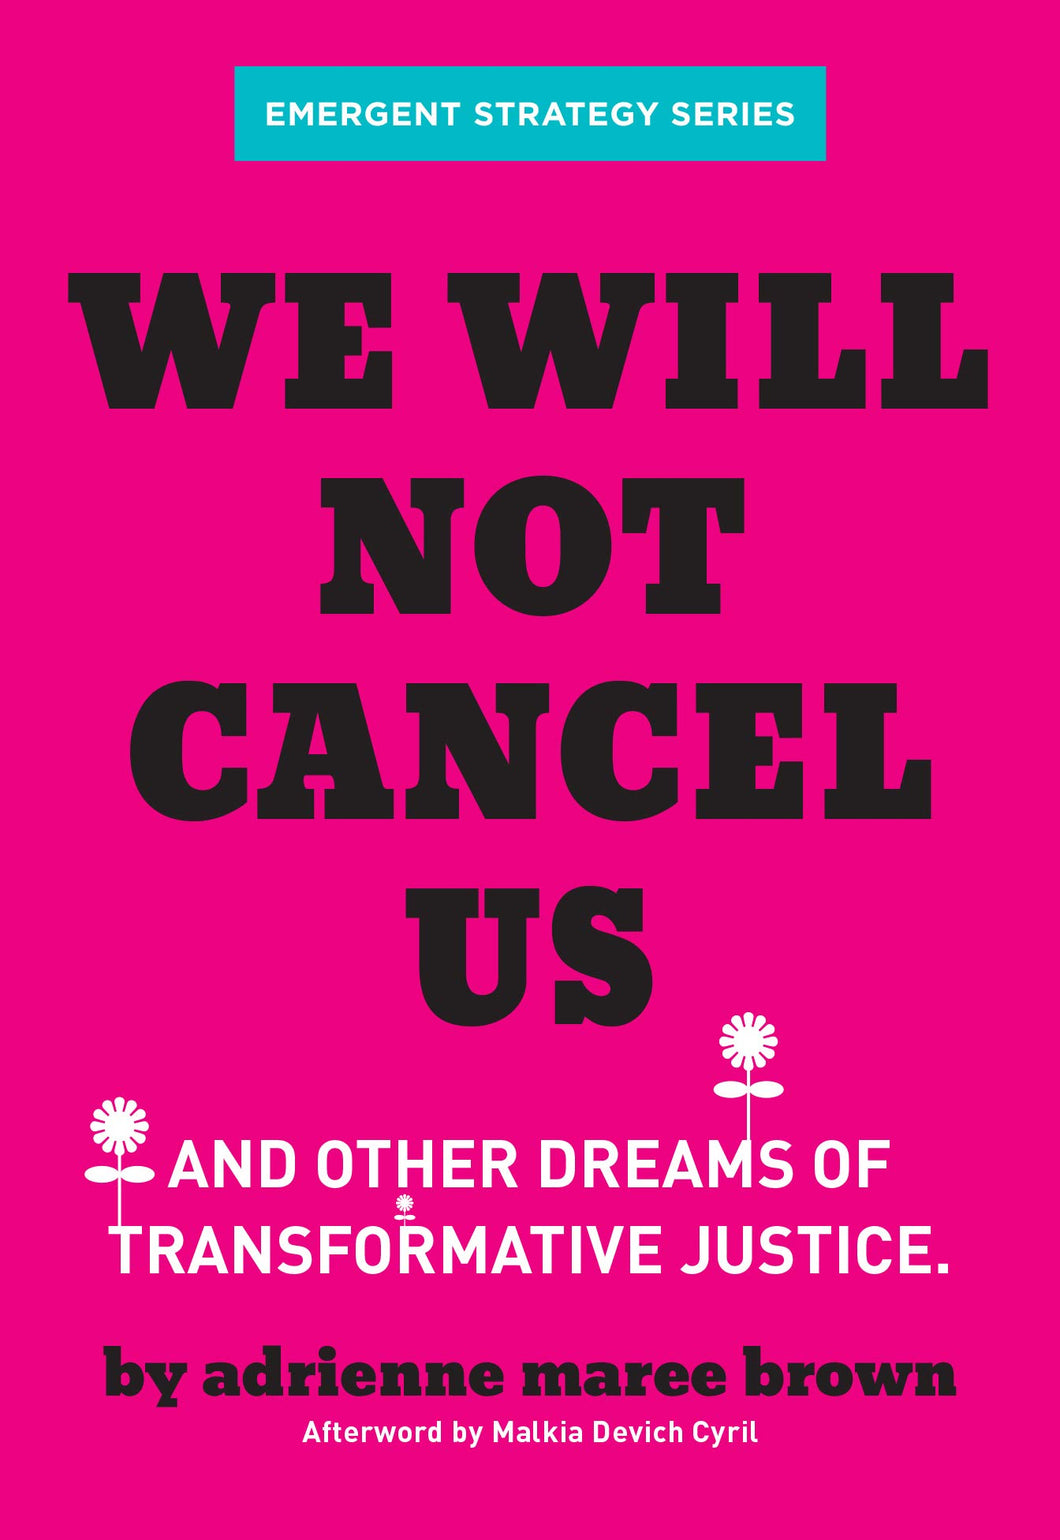 We Will Not Cancel Us: And Other Dreams of Transformative Justice (Emergent Strategy Series) by Adrienne Maree Brown